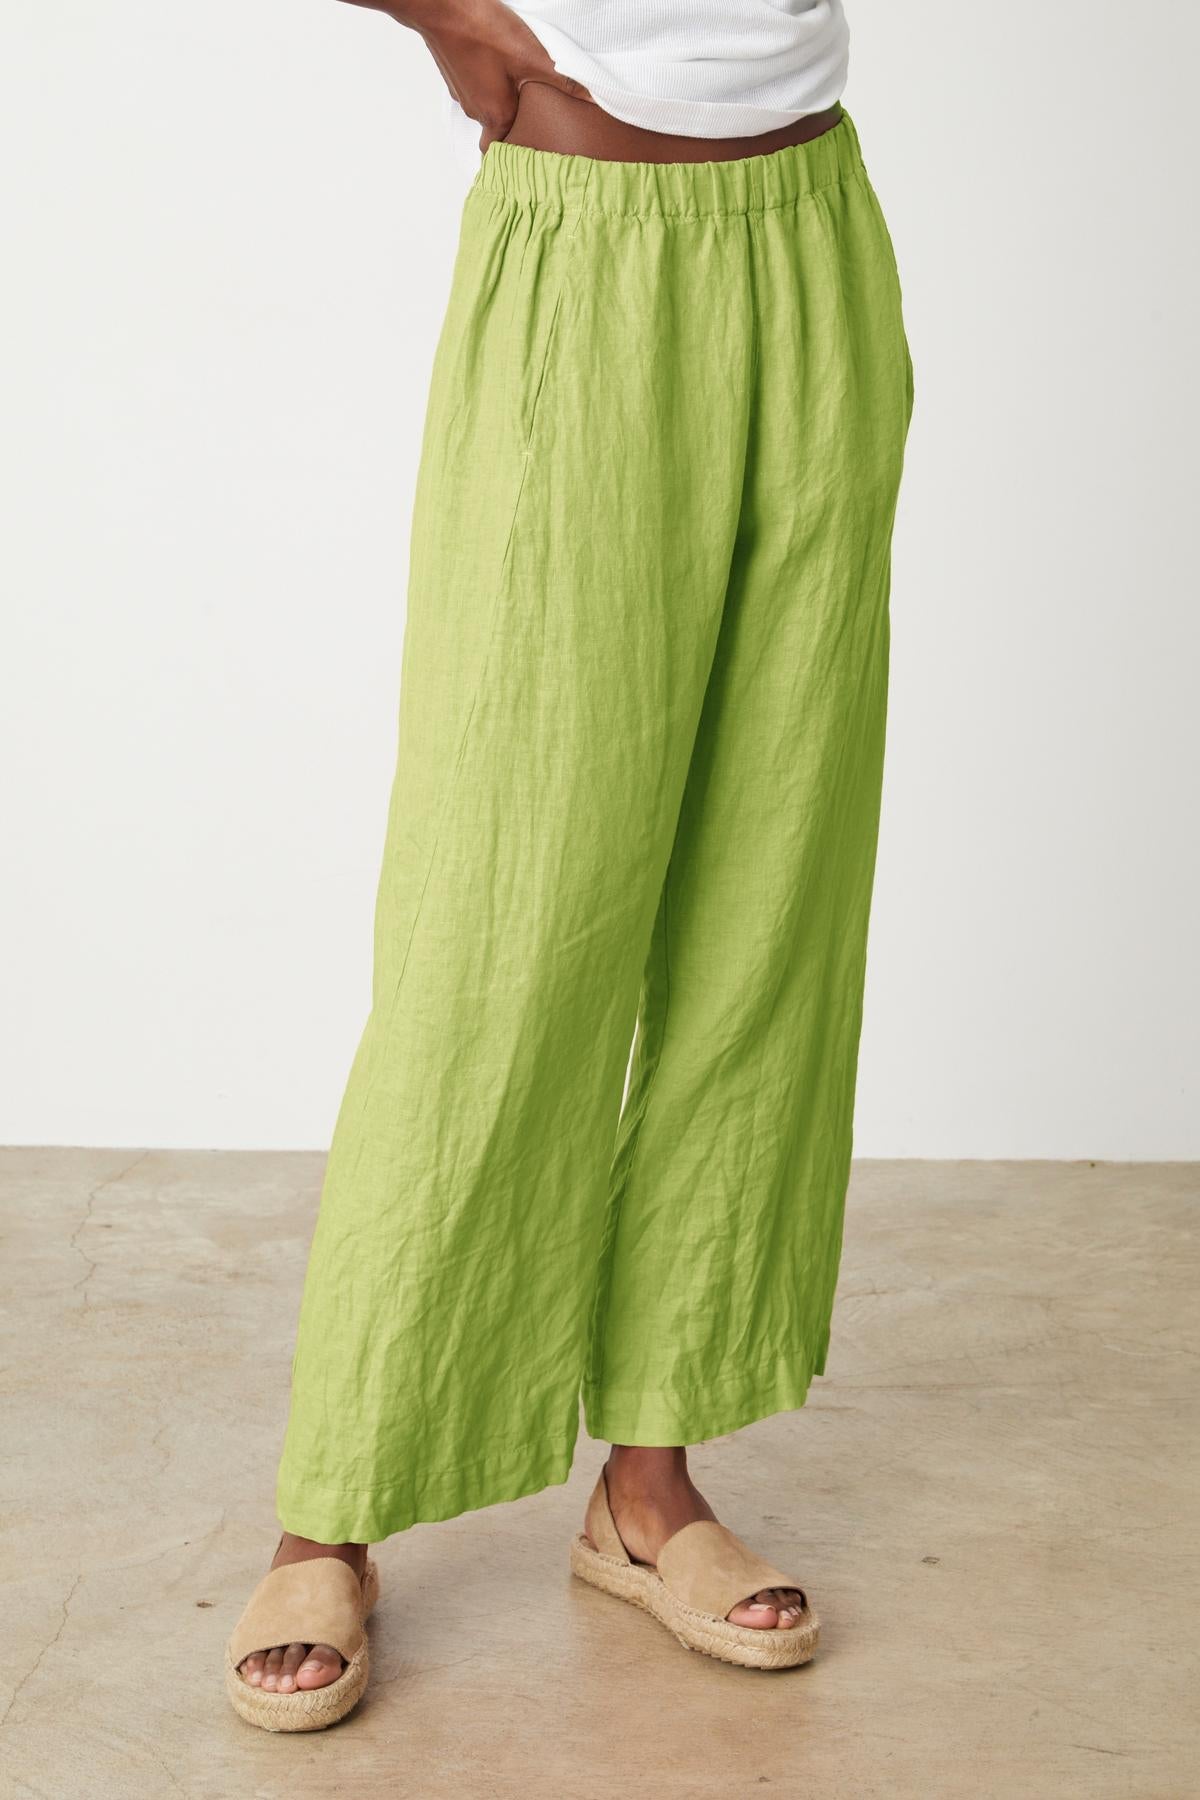   Lola pant in kiwi green colored linen front & side 